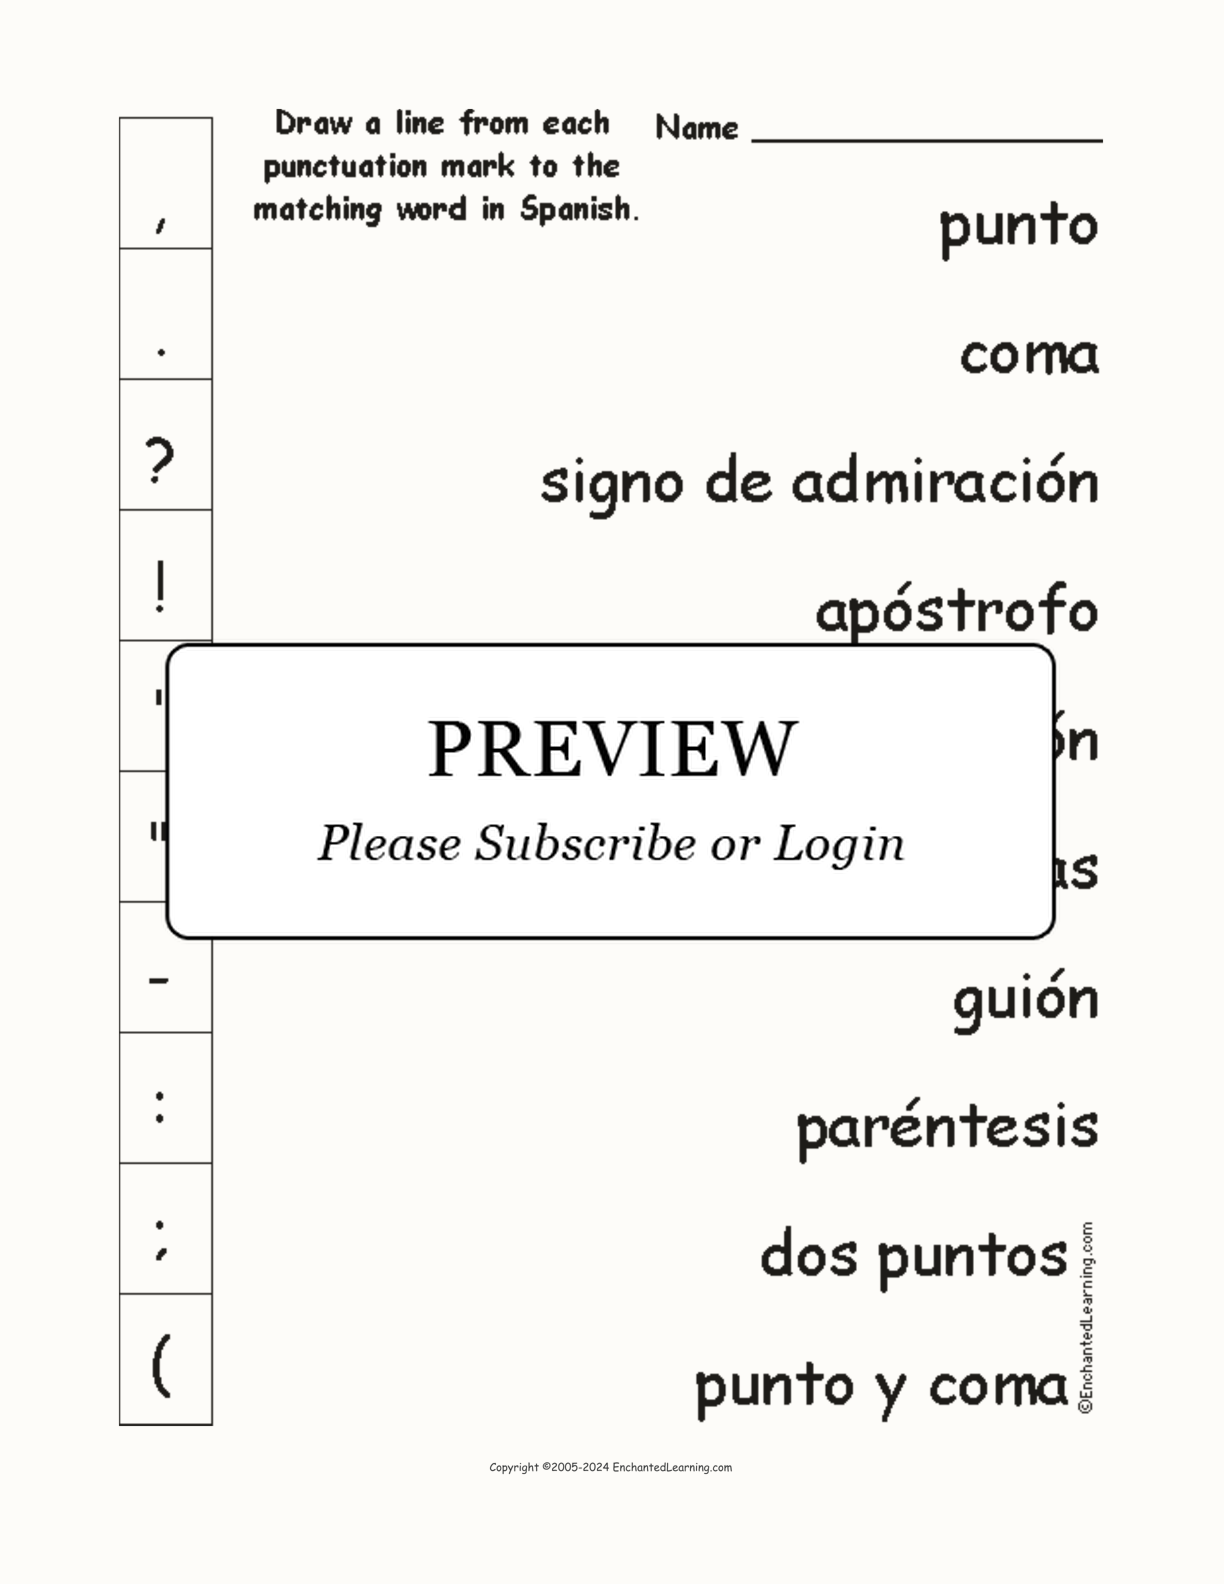 Match Spanish Punctuation Marks to the Pictures interactive worksheet page 1